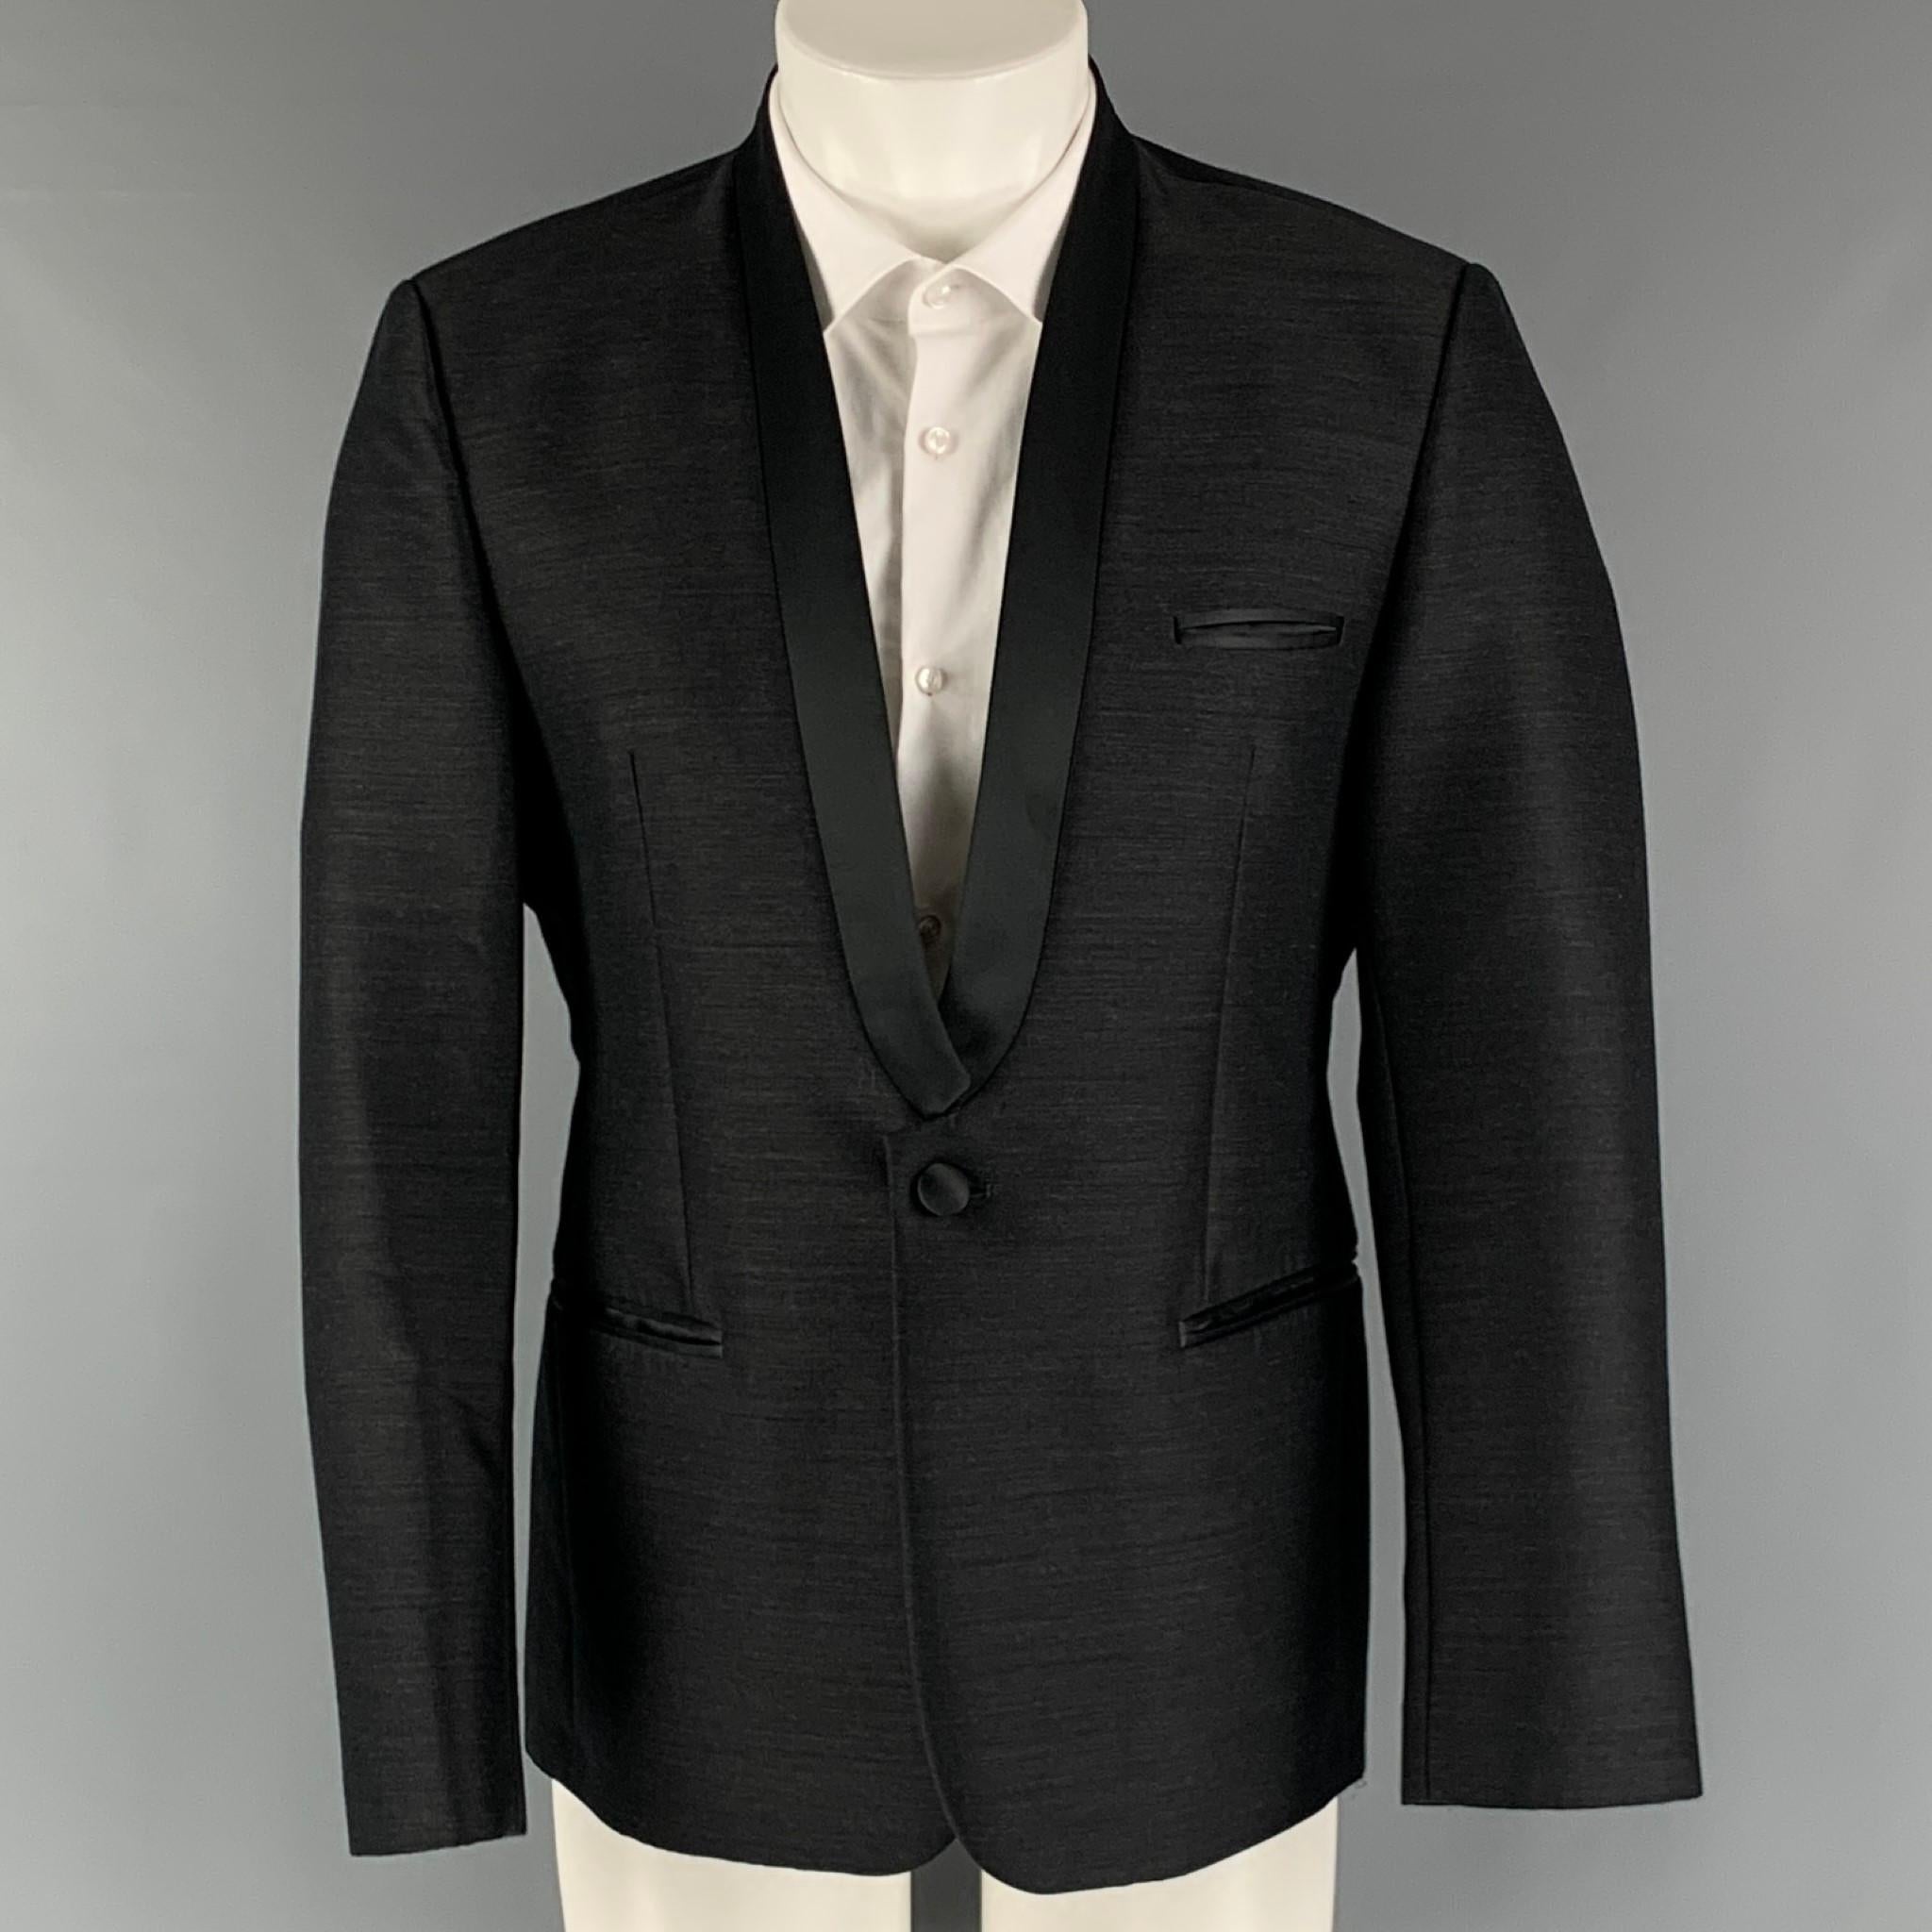 EMPORIO ARMANI 'Matt Line' sport coat comes in a black wool blend woven material full liner featuring a shawl collar, welt pockets, single back vent, and a single button closure. Made in Italy.

Excellent Pre-Owned Condition.
Marked: